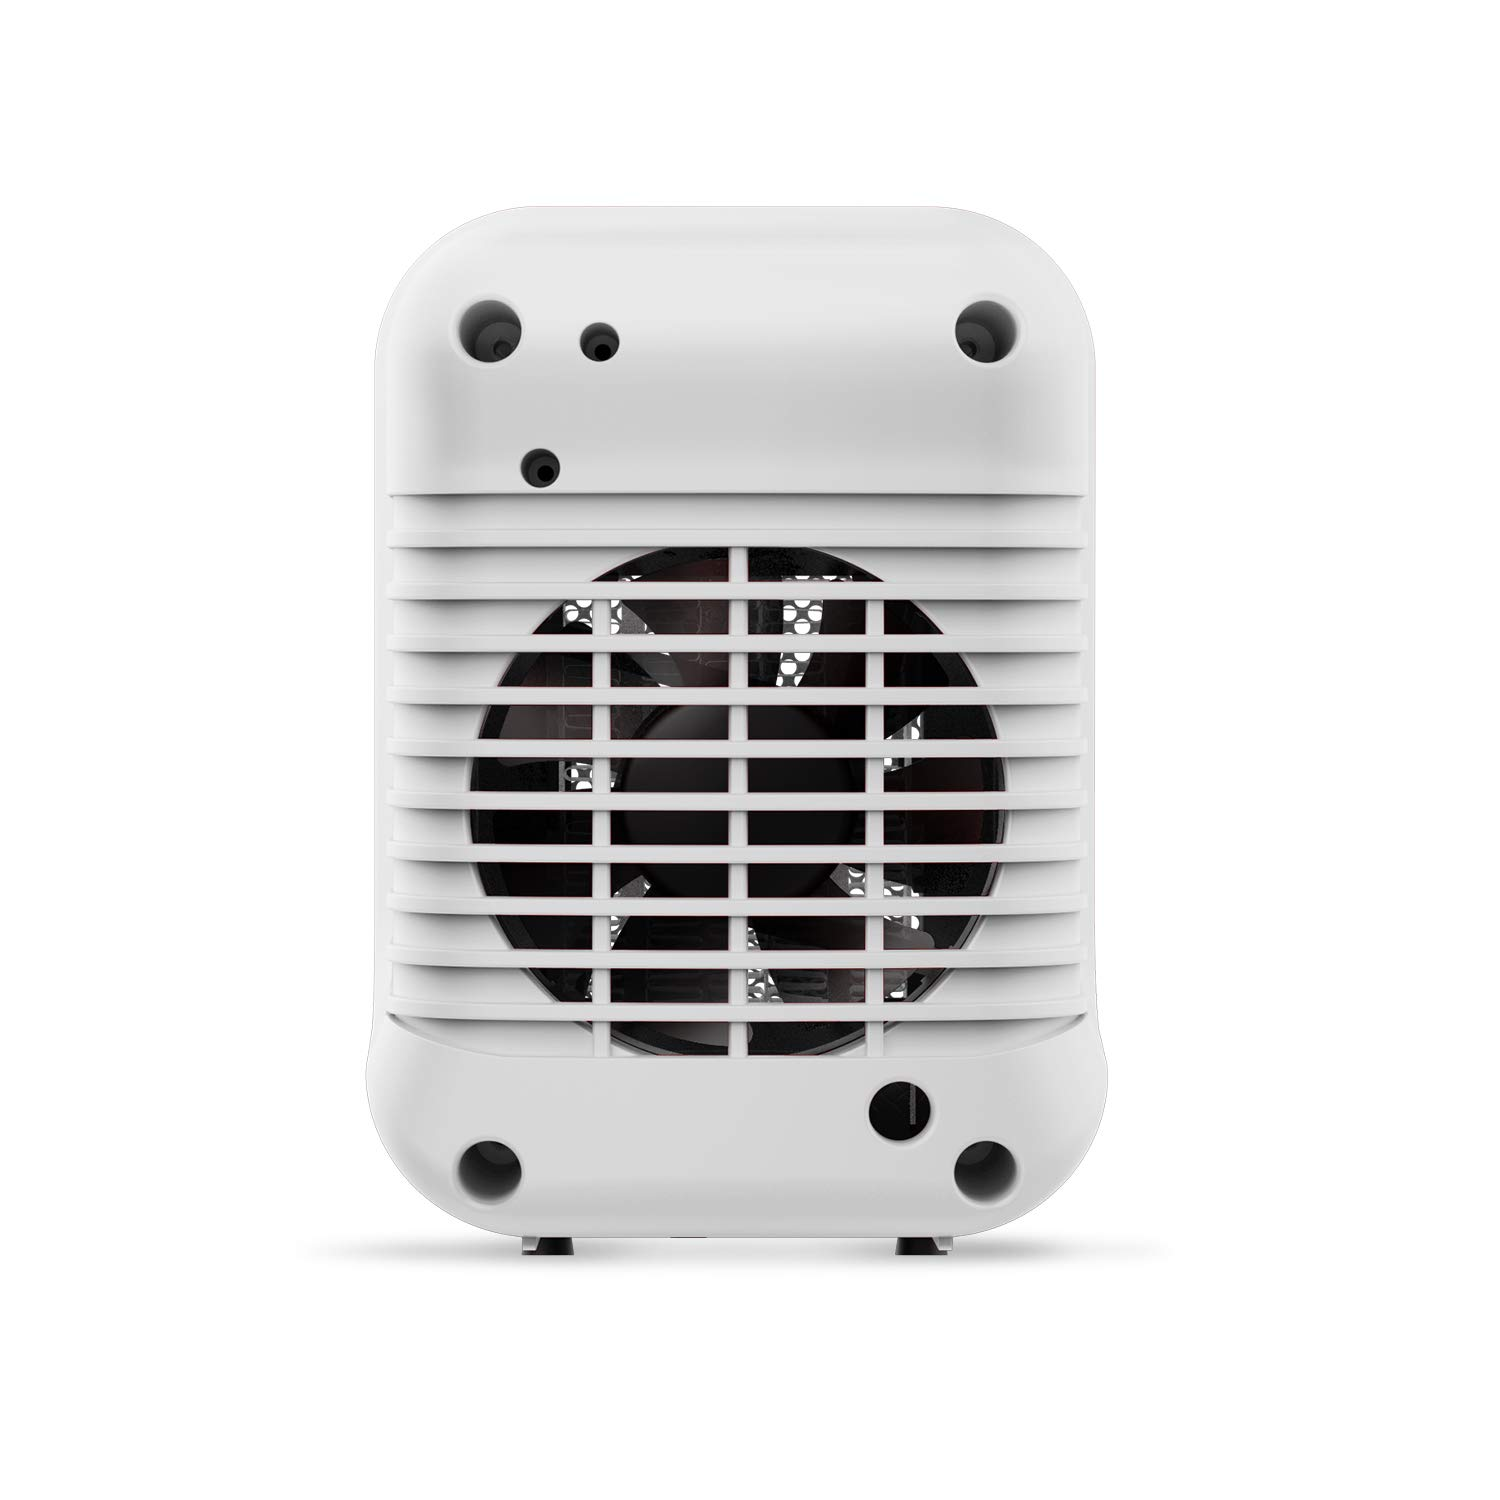 Andily® Ceramic Small Heater with Thermostat for Office Desk - White